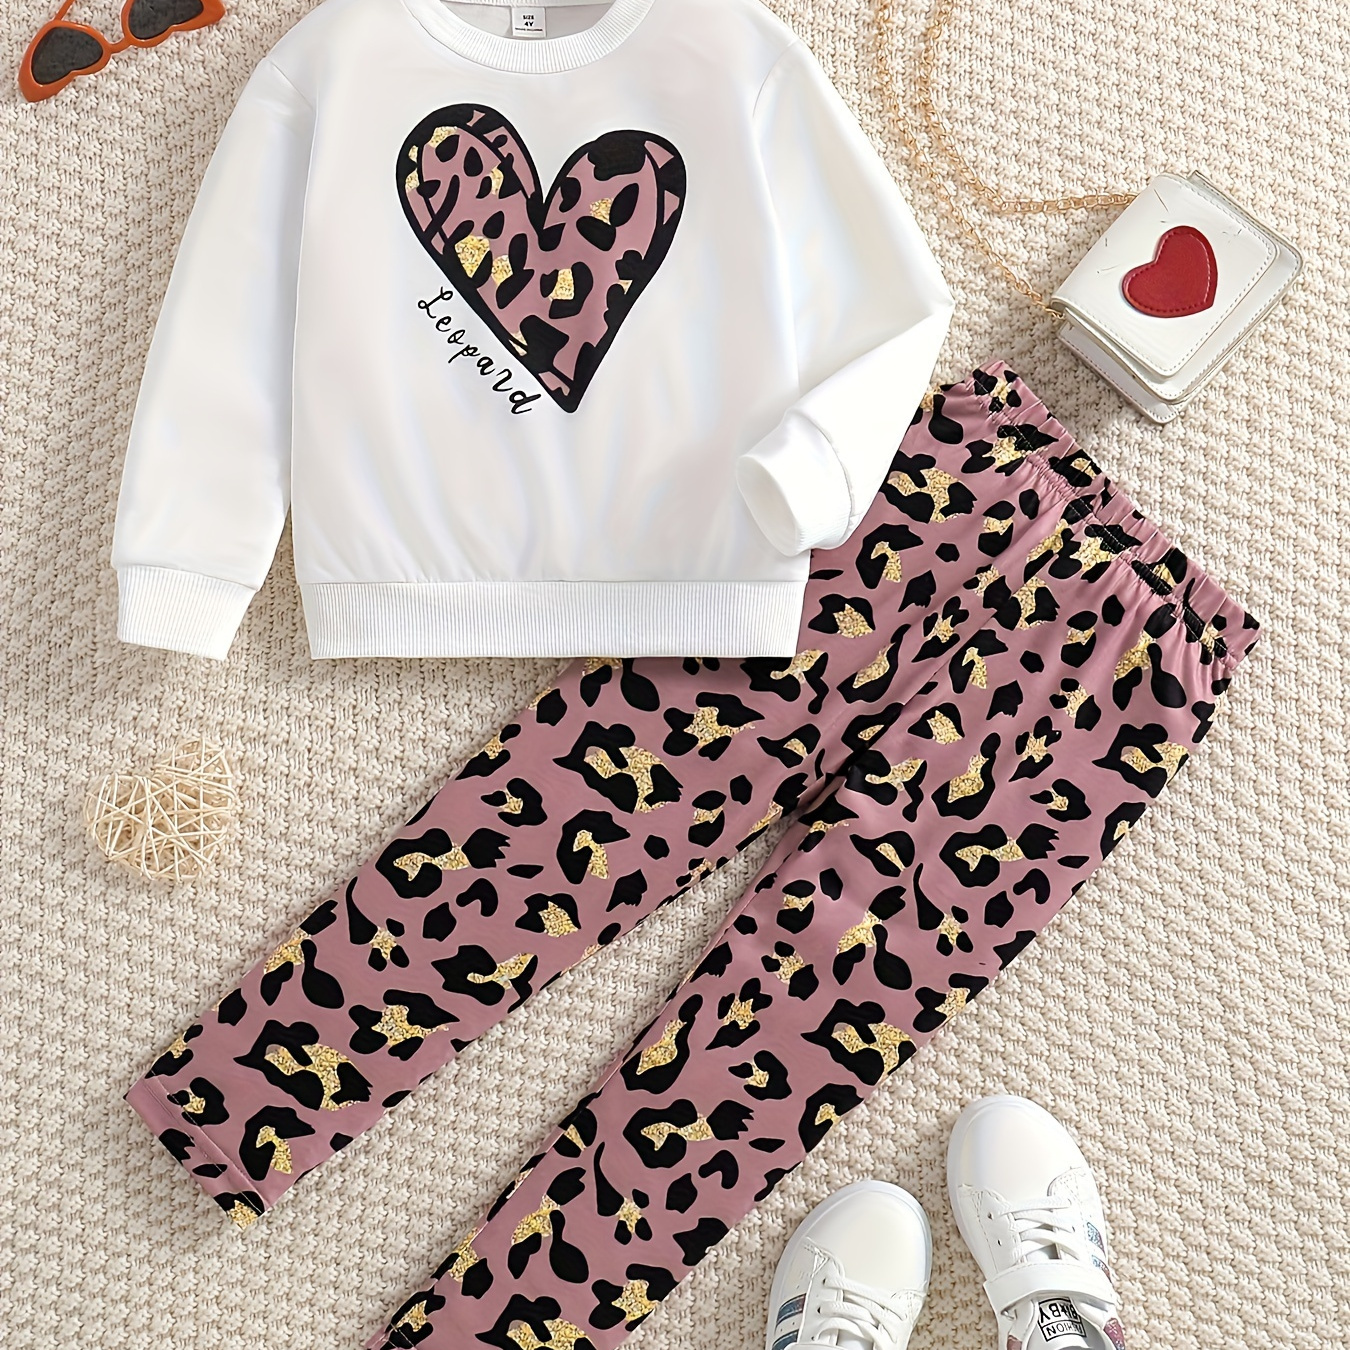 

Leopard Heart Print Girls Co-ords Set, Long Sleeve Sweatshirt Top + Pants, Spring/ Fall Clothes, Casual Outdoor, Party, Gift